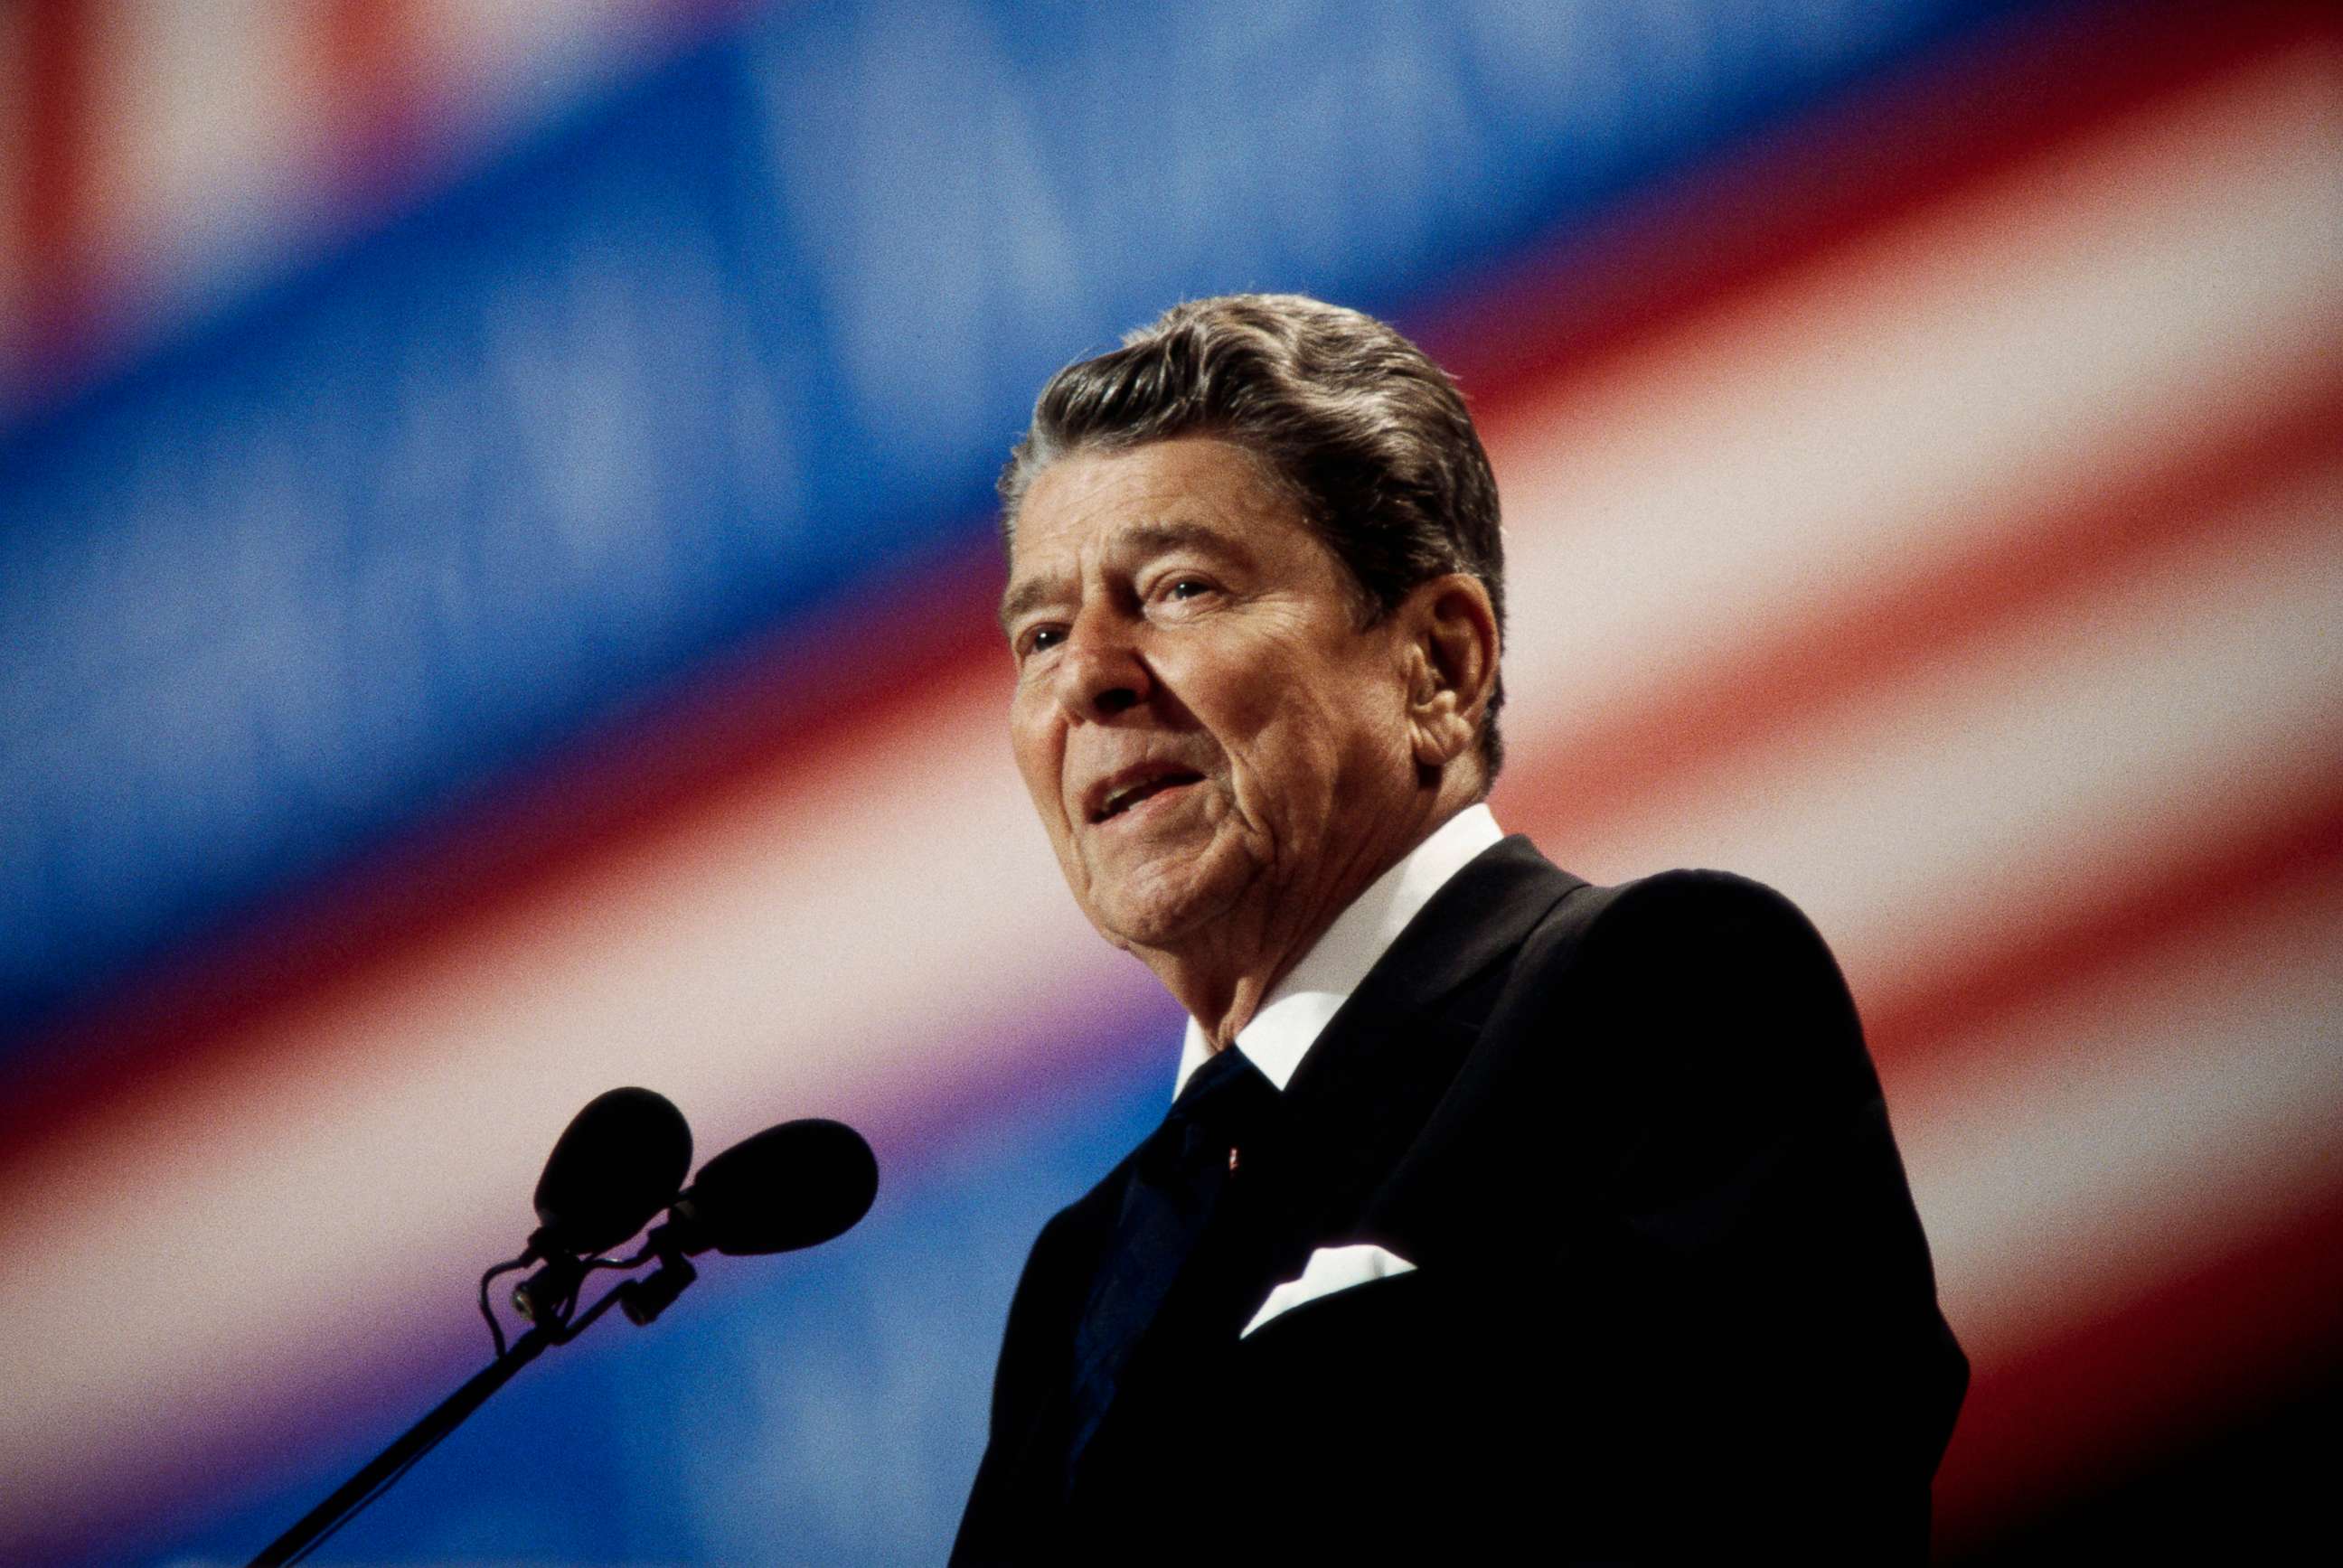 PHOTO: Ronald Reagan Speaking at the Republican National Convention, Aug. 17, 1992.